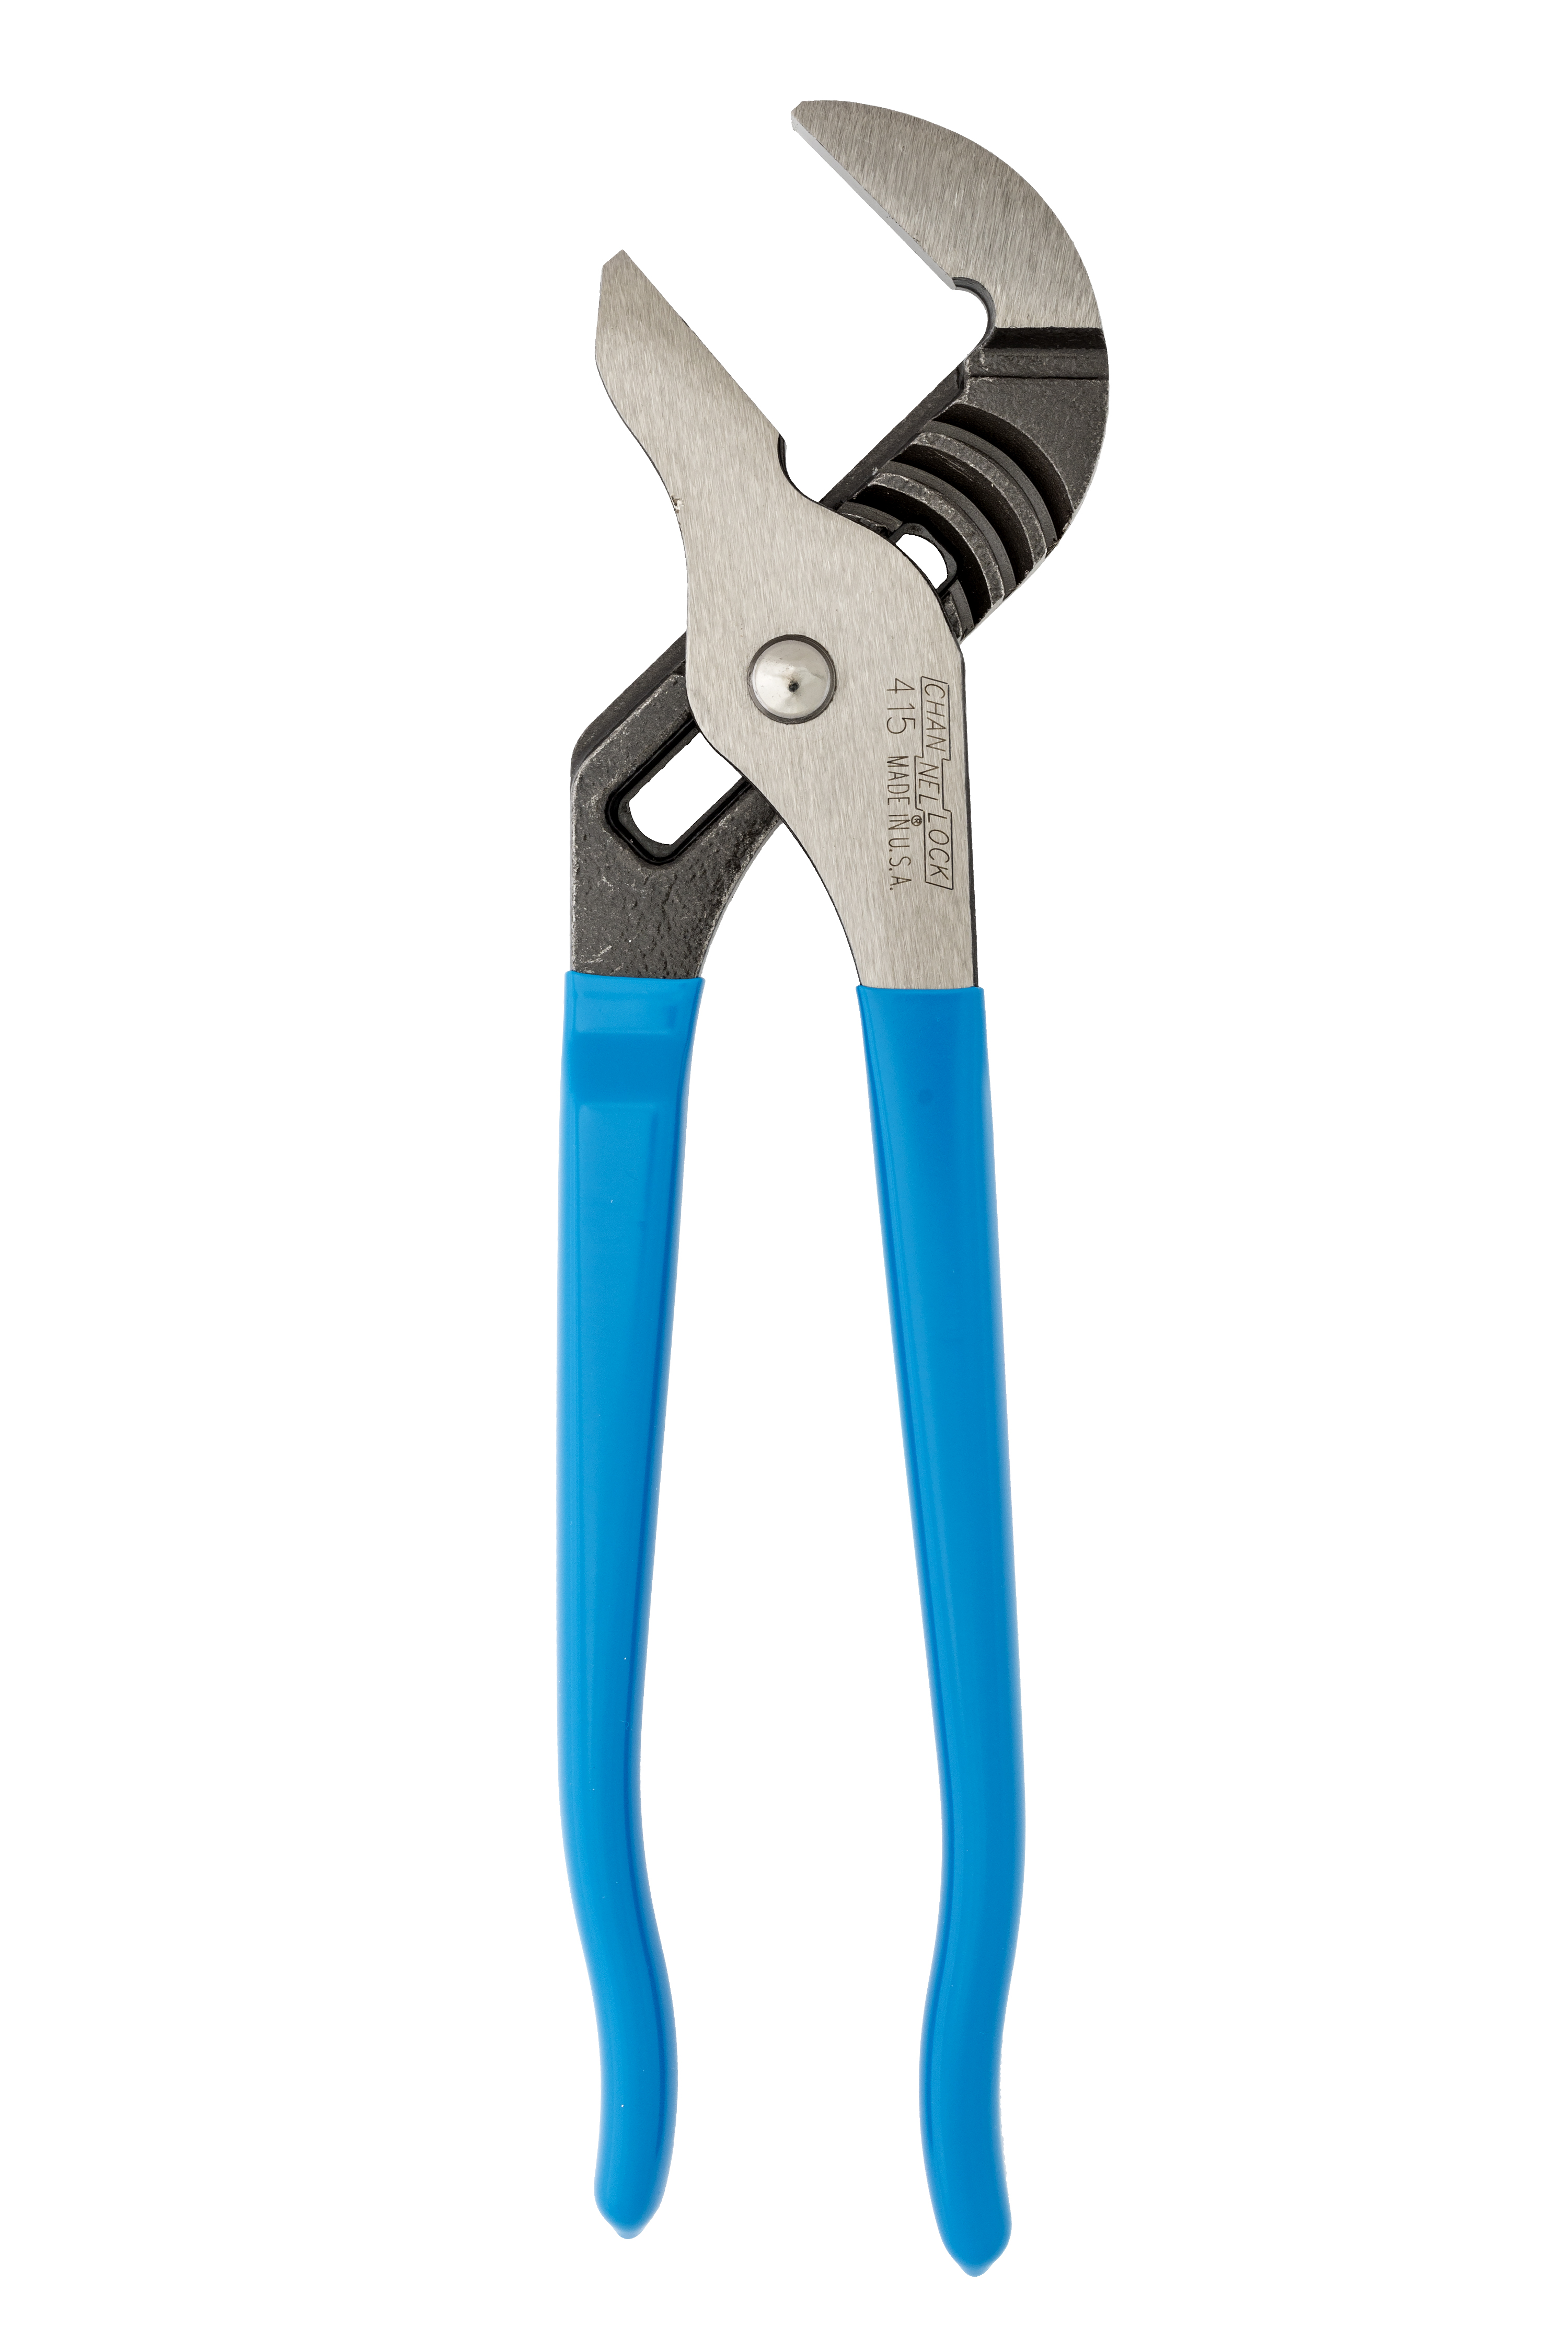 10" Smooth Jaw Tongue & Groove Plier